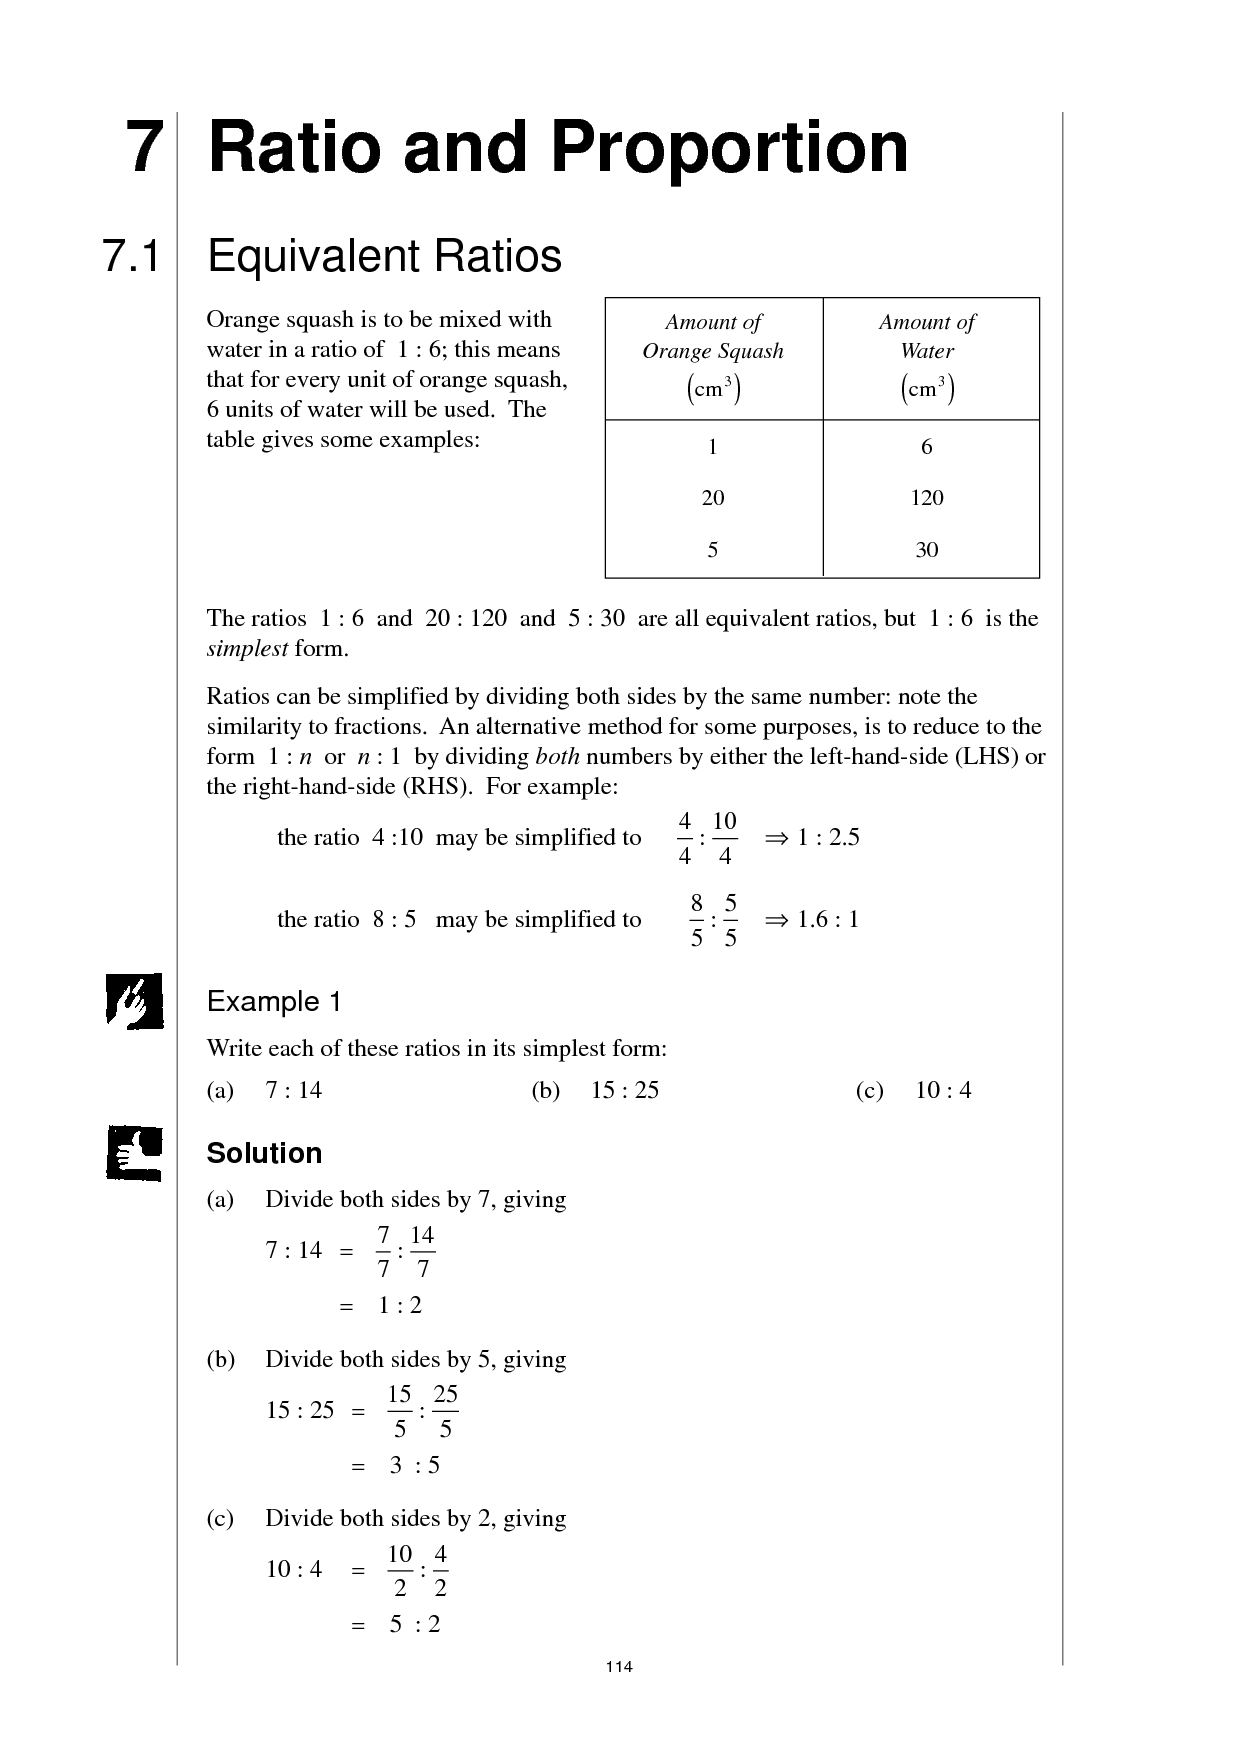 ratios-and-proportions-worksheet-7-1-answers-1000-images-about-math-ratios-proportions-on